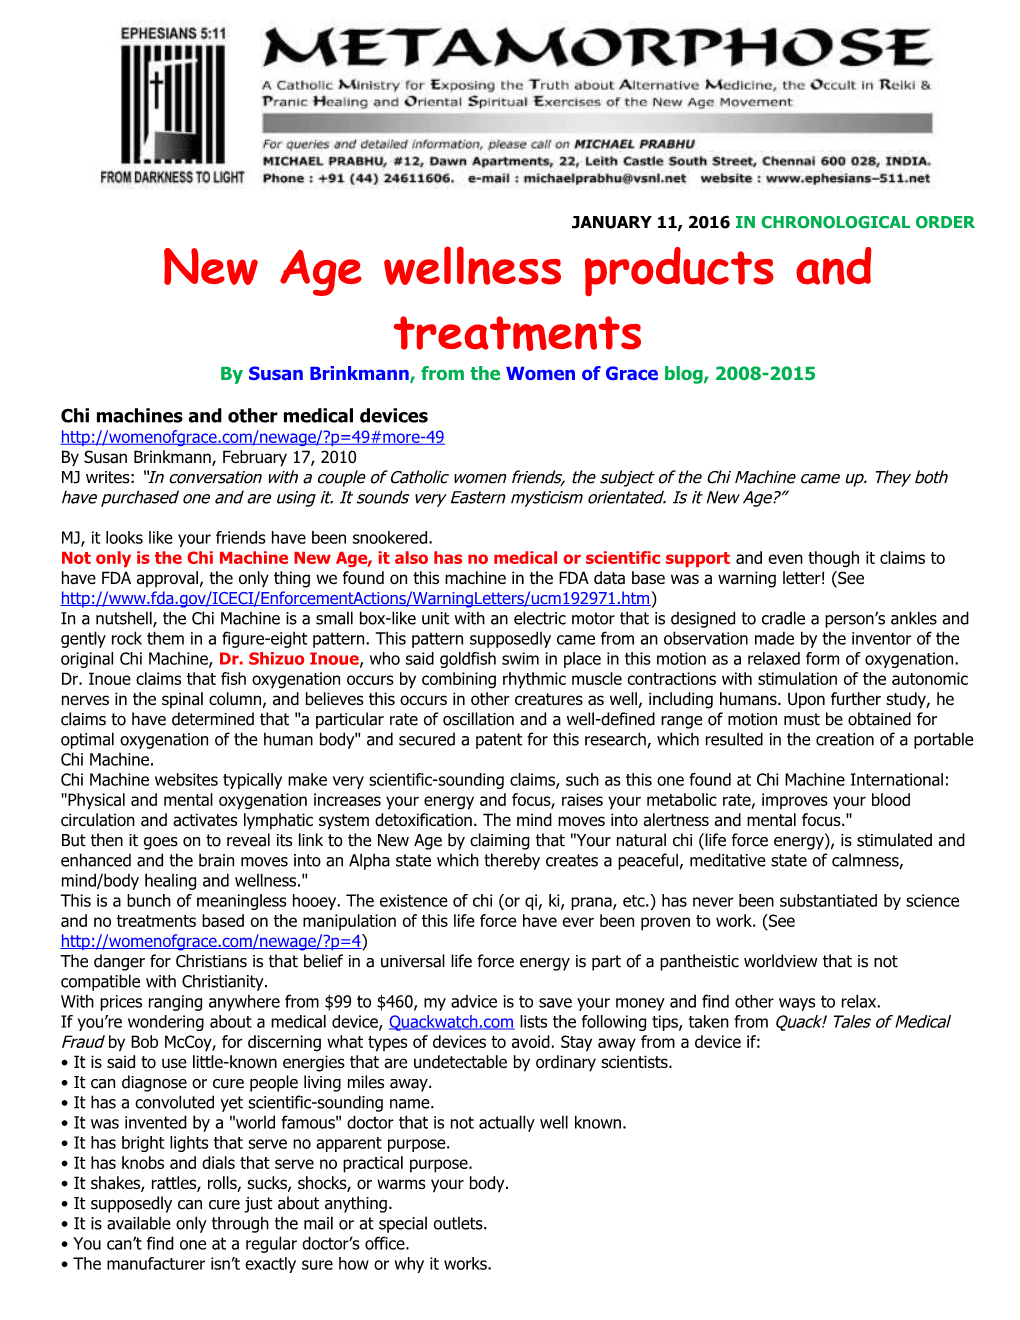 New Age Wellness Products and Treatments